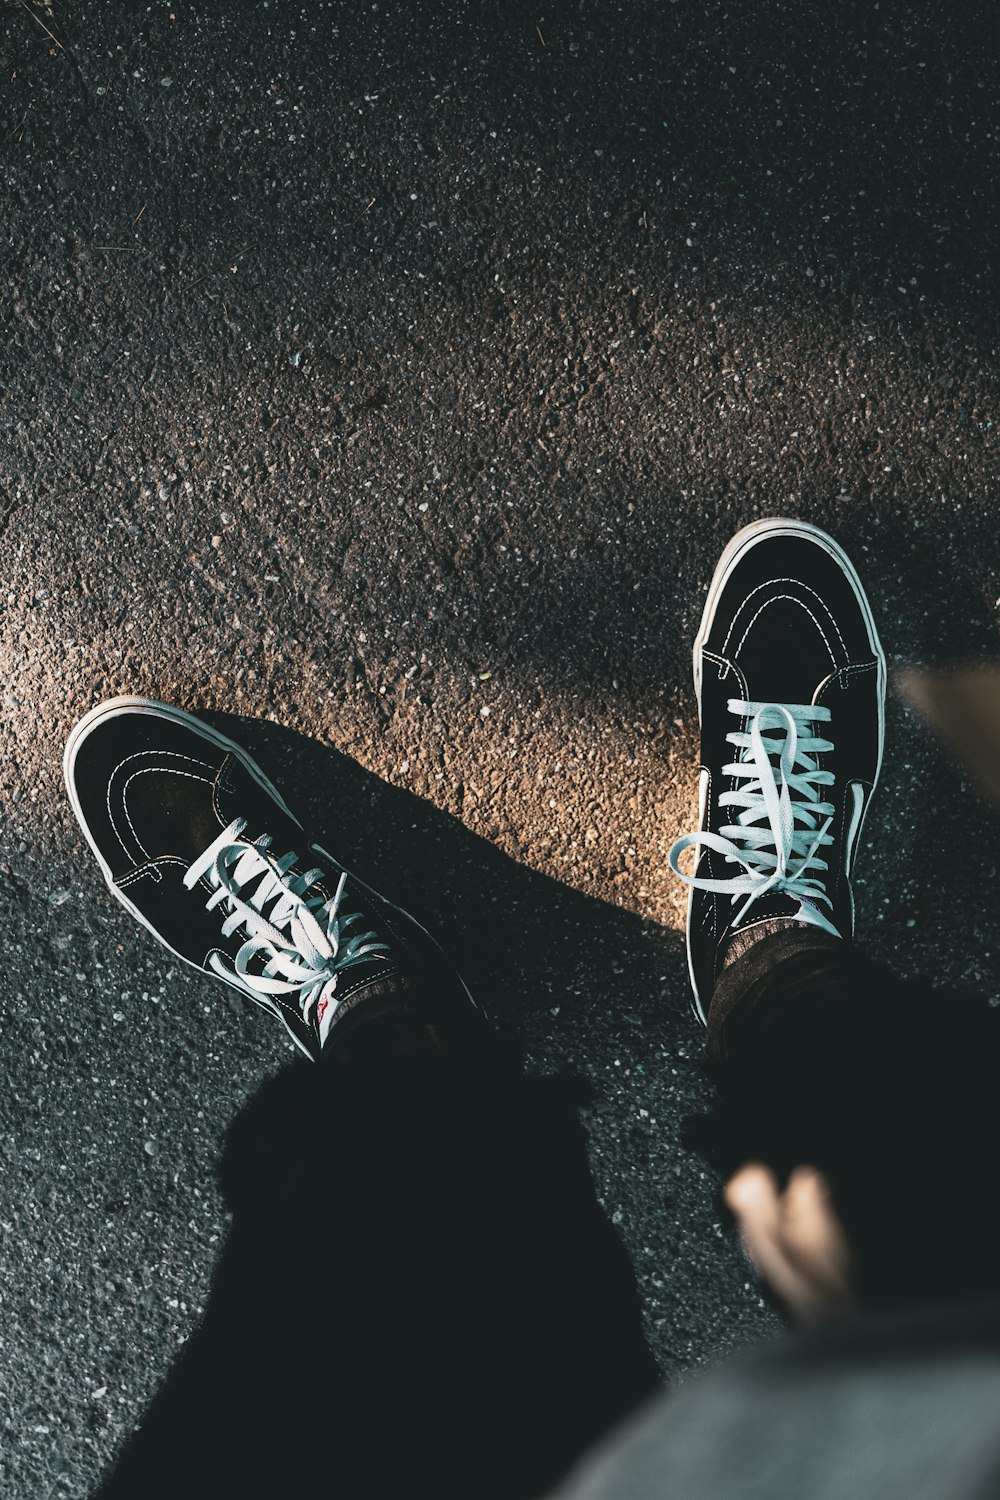 Person's feet wearing black-and-white suede low-top sneakers photo – Free  Grey Image on Unsplash